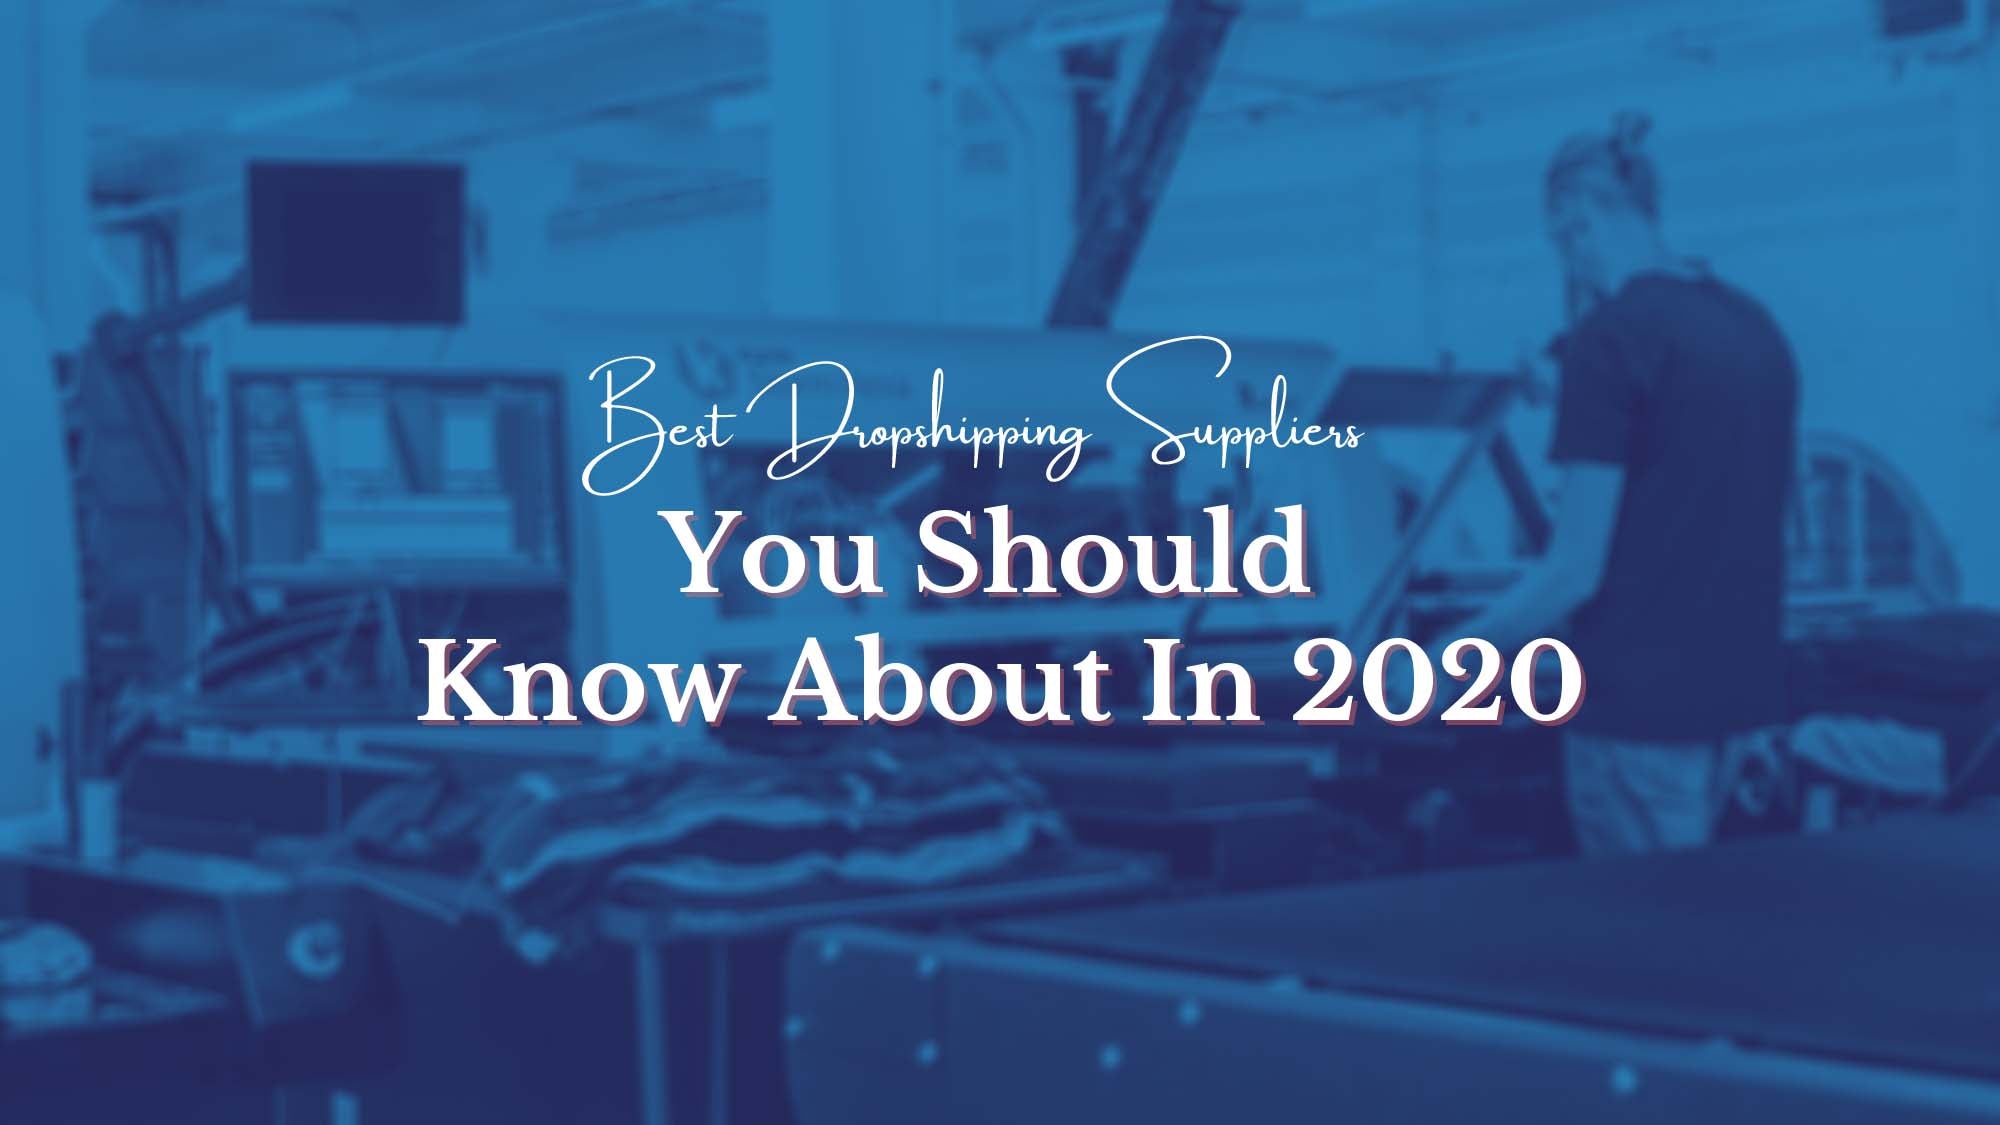 Best Dropshipping Suppliers You Should Know About In 2020